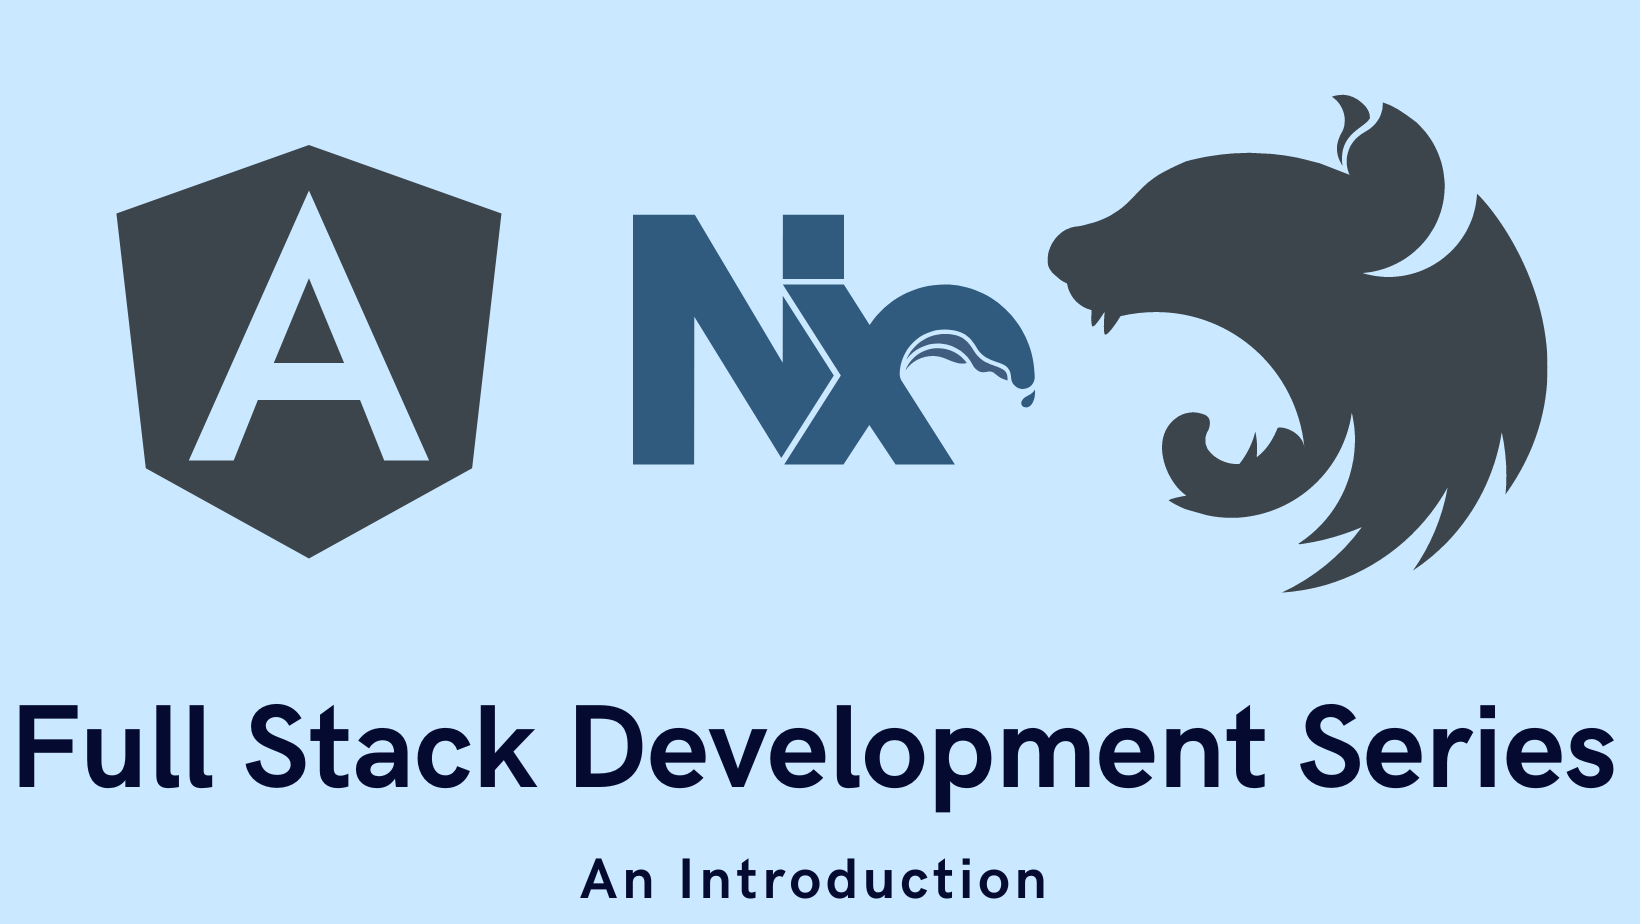 Full Stack Development Series: An Introduction